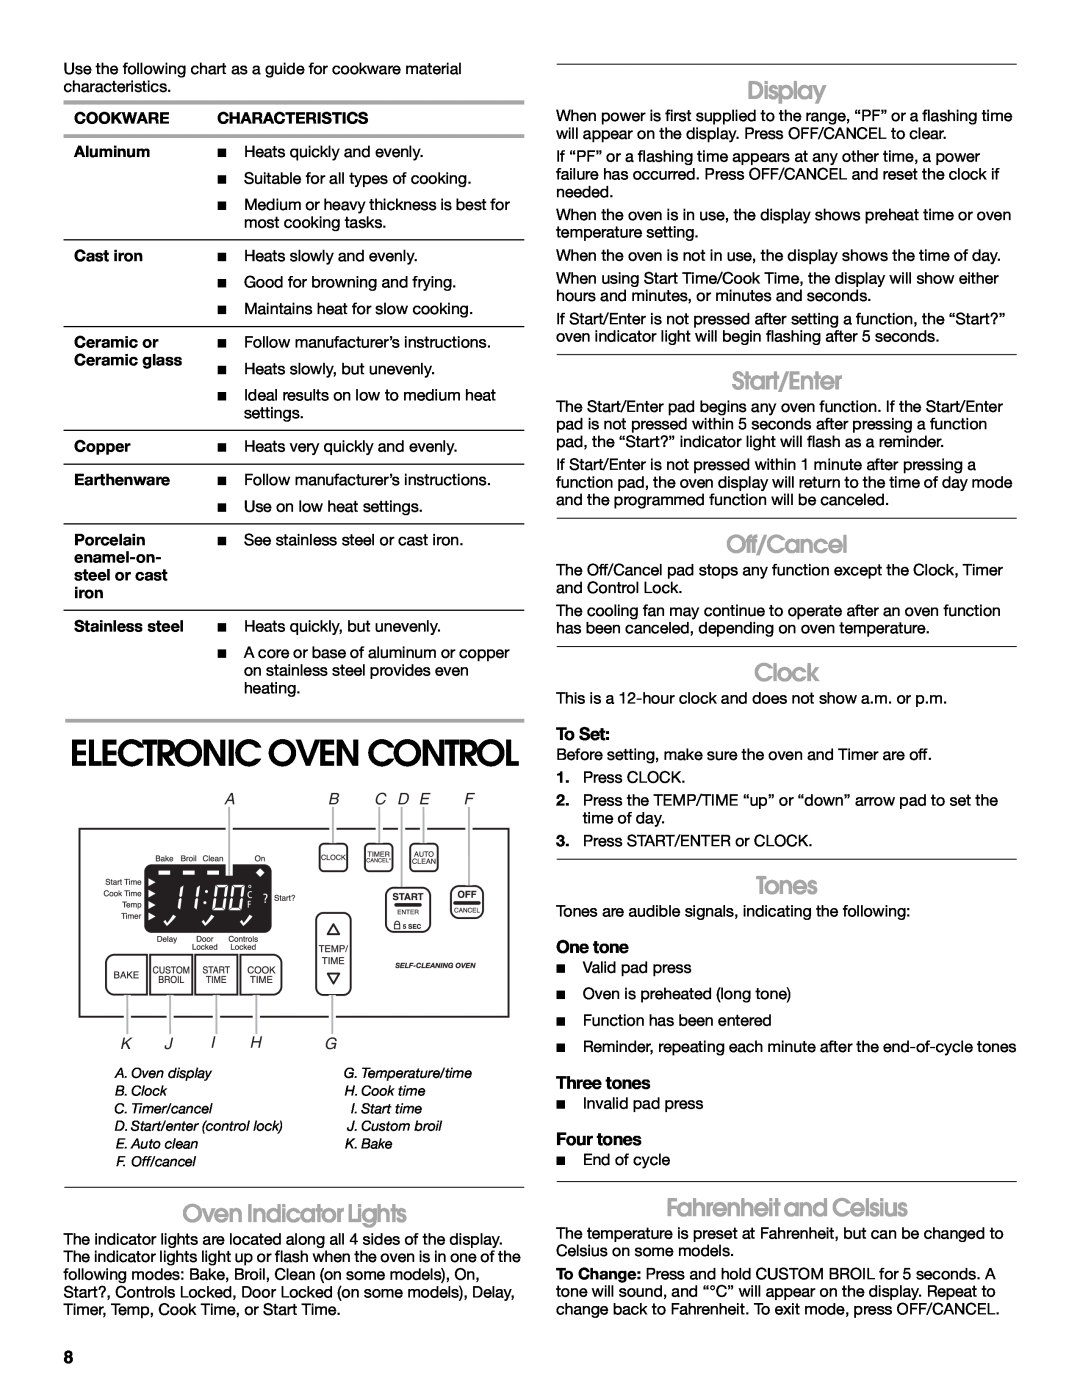 Whirlpool W10120516A manual Electronic Oven Control, Oven Indicator Lights, Display, Start/Enter, Off/Cancel, Clock, Tones 